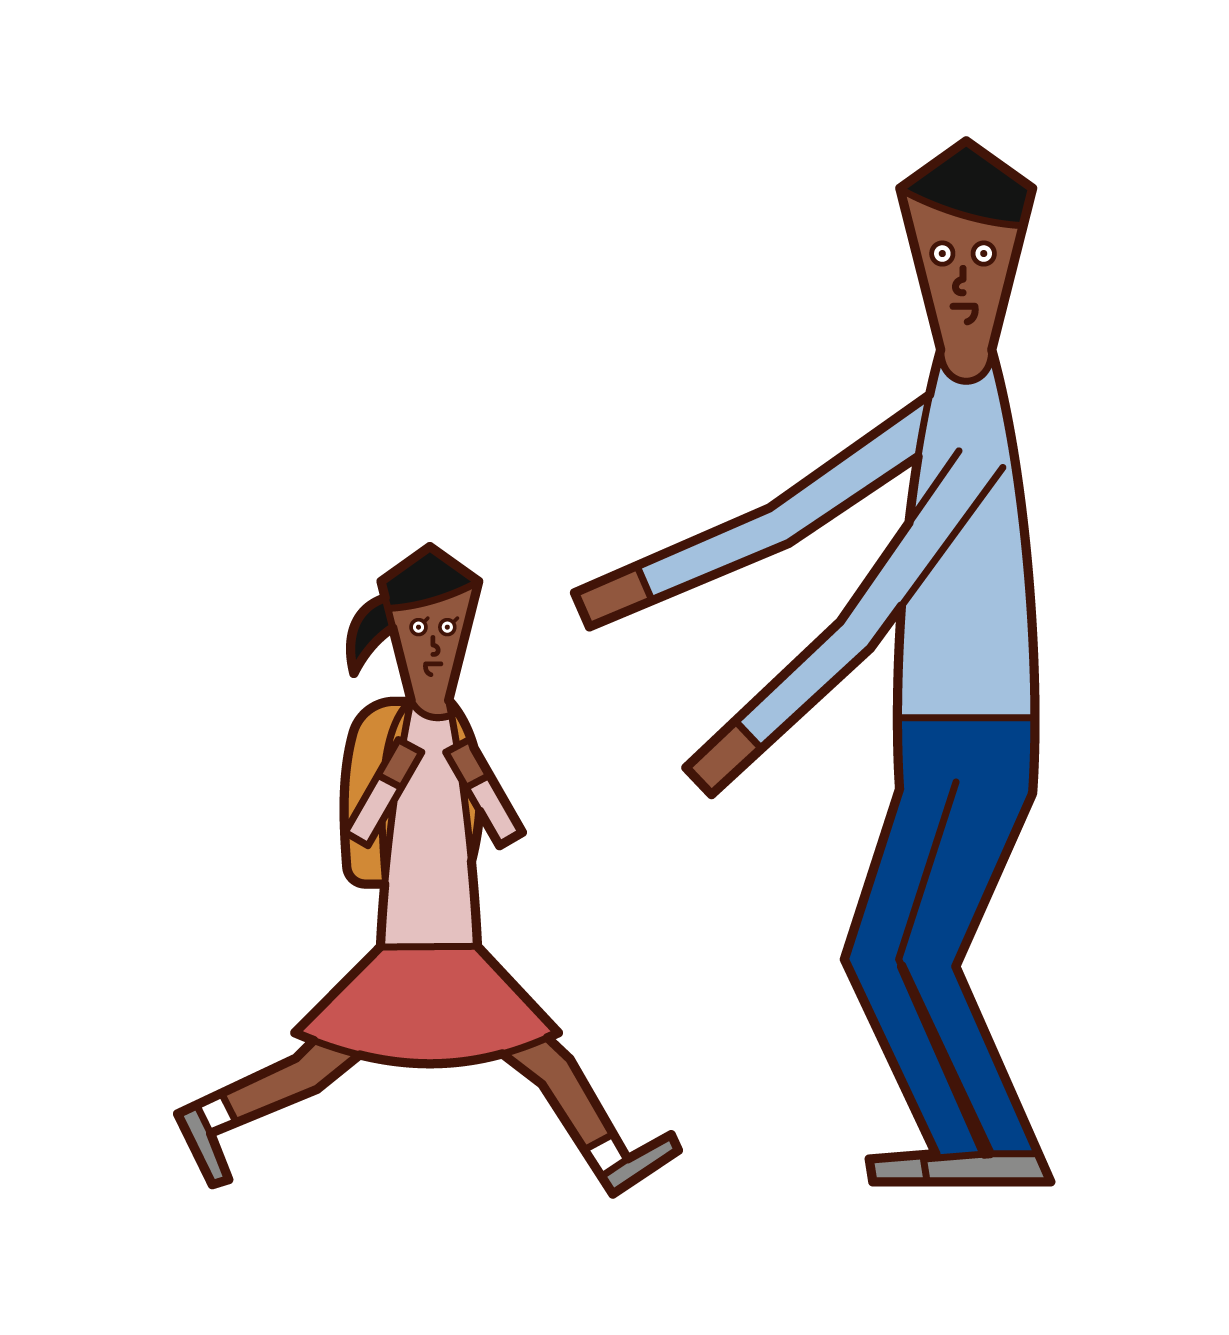 Illustration of a father greeting a child (daughter)